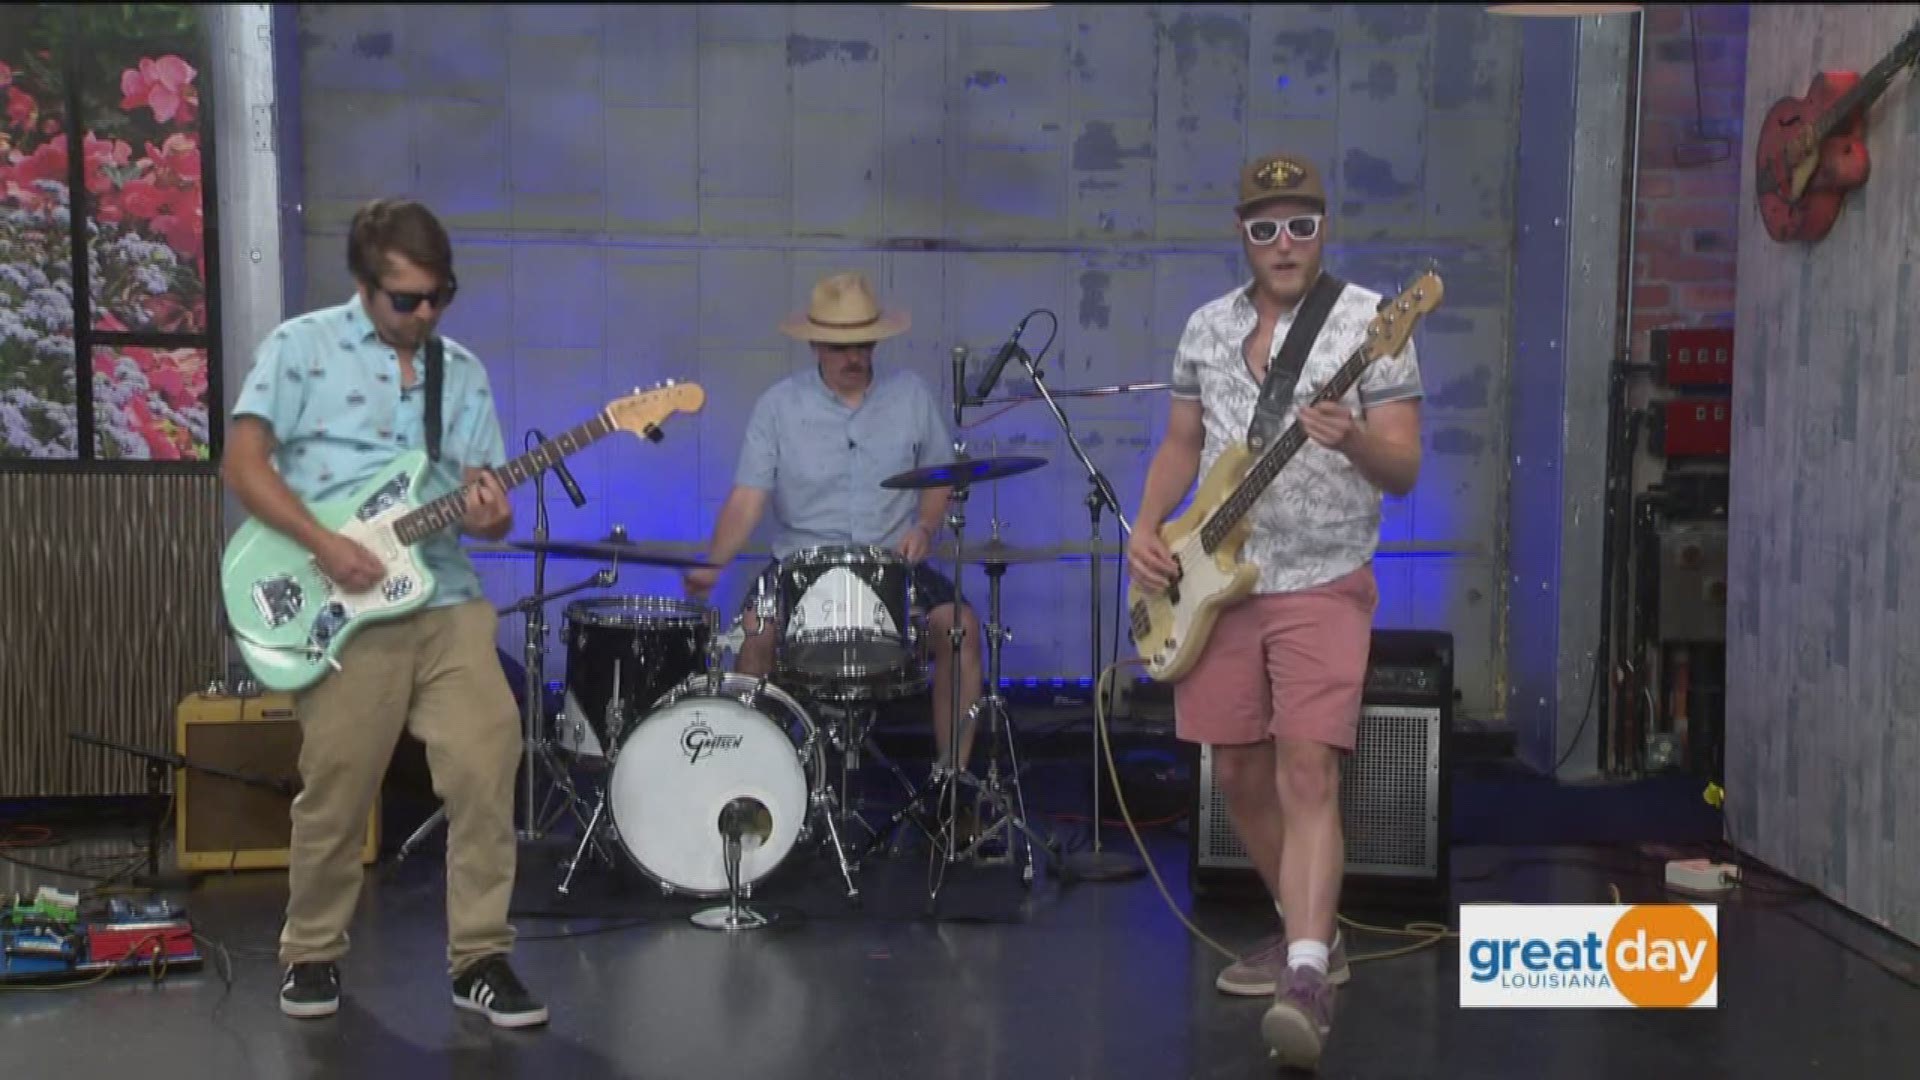 We bring the beach to you with a performance from Shark Attack.